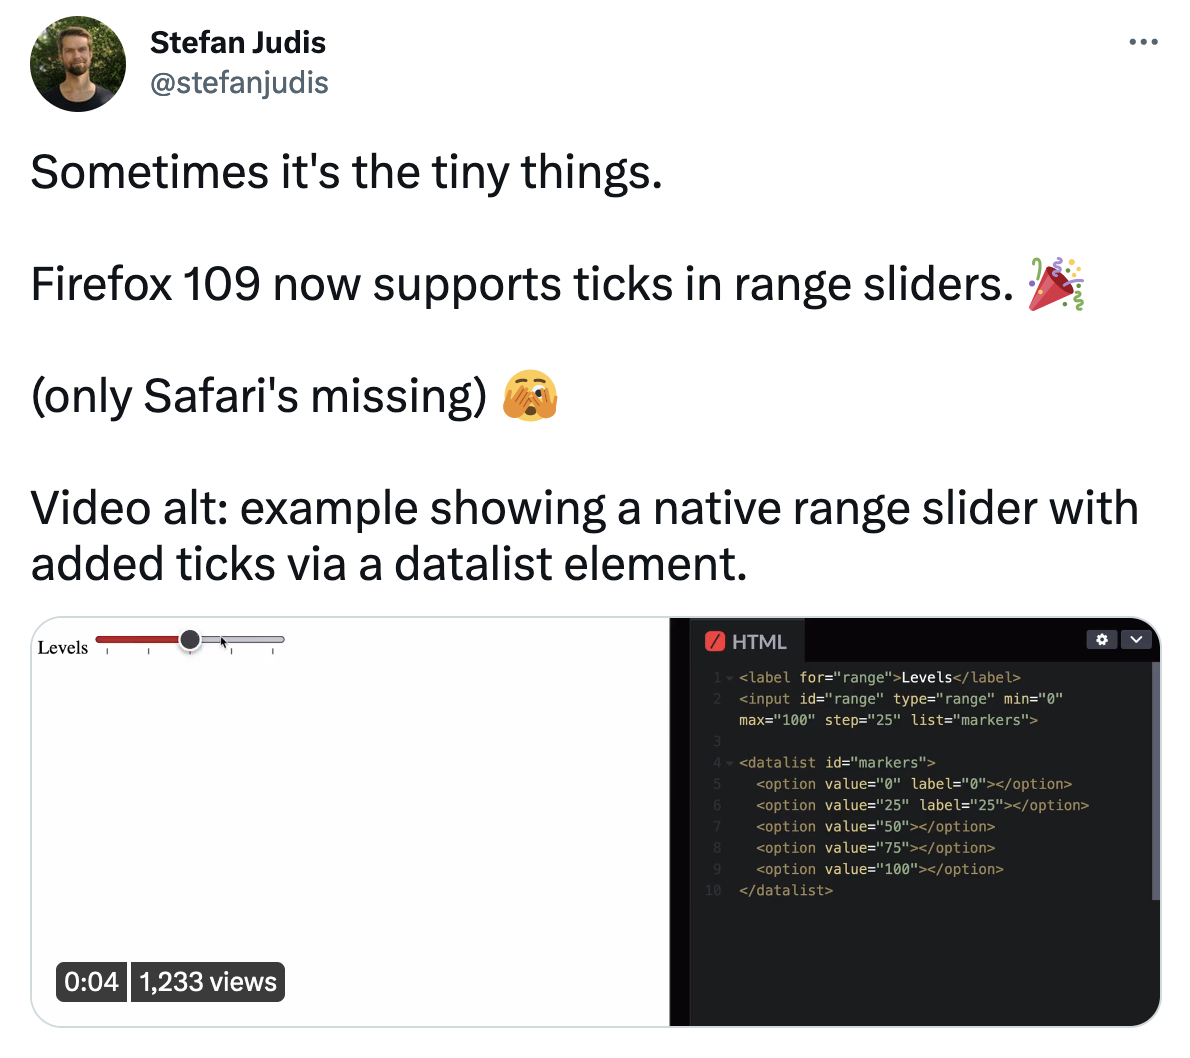 Tweet from Stefan Judis: Sometimes it's the tiny things.   Firefox 109 now supports ticks in range sliders. 🎉  (only Safari's missing) 🫣  Video alt: example showing a native range slider with added ticks via a datalist element.